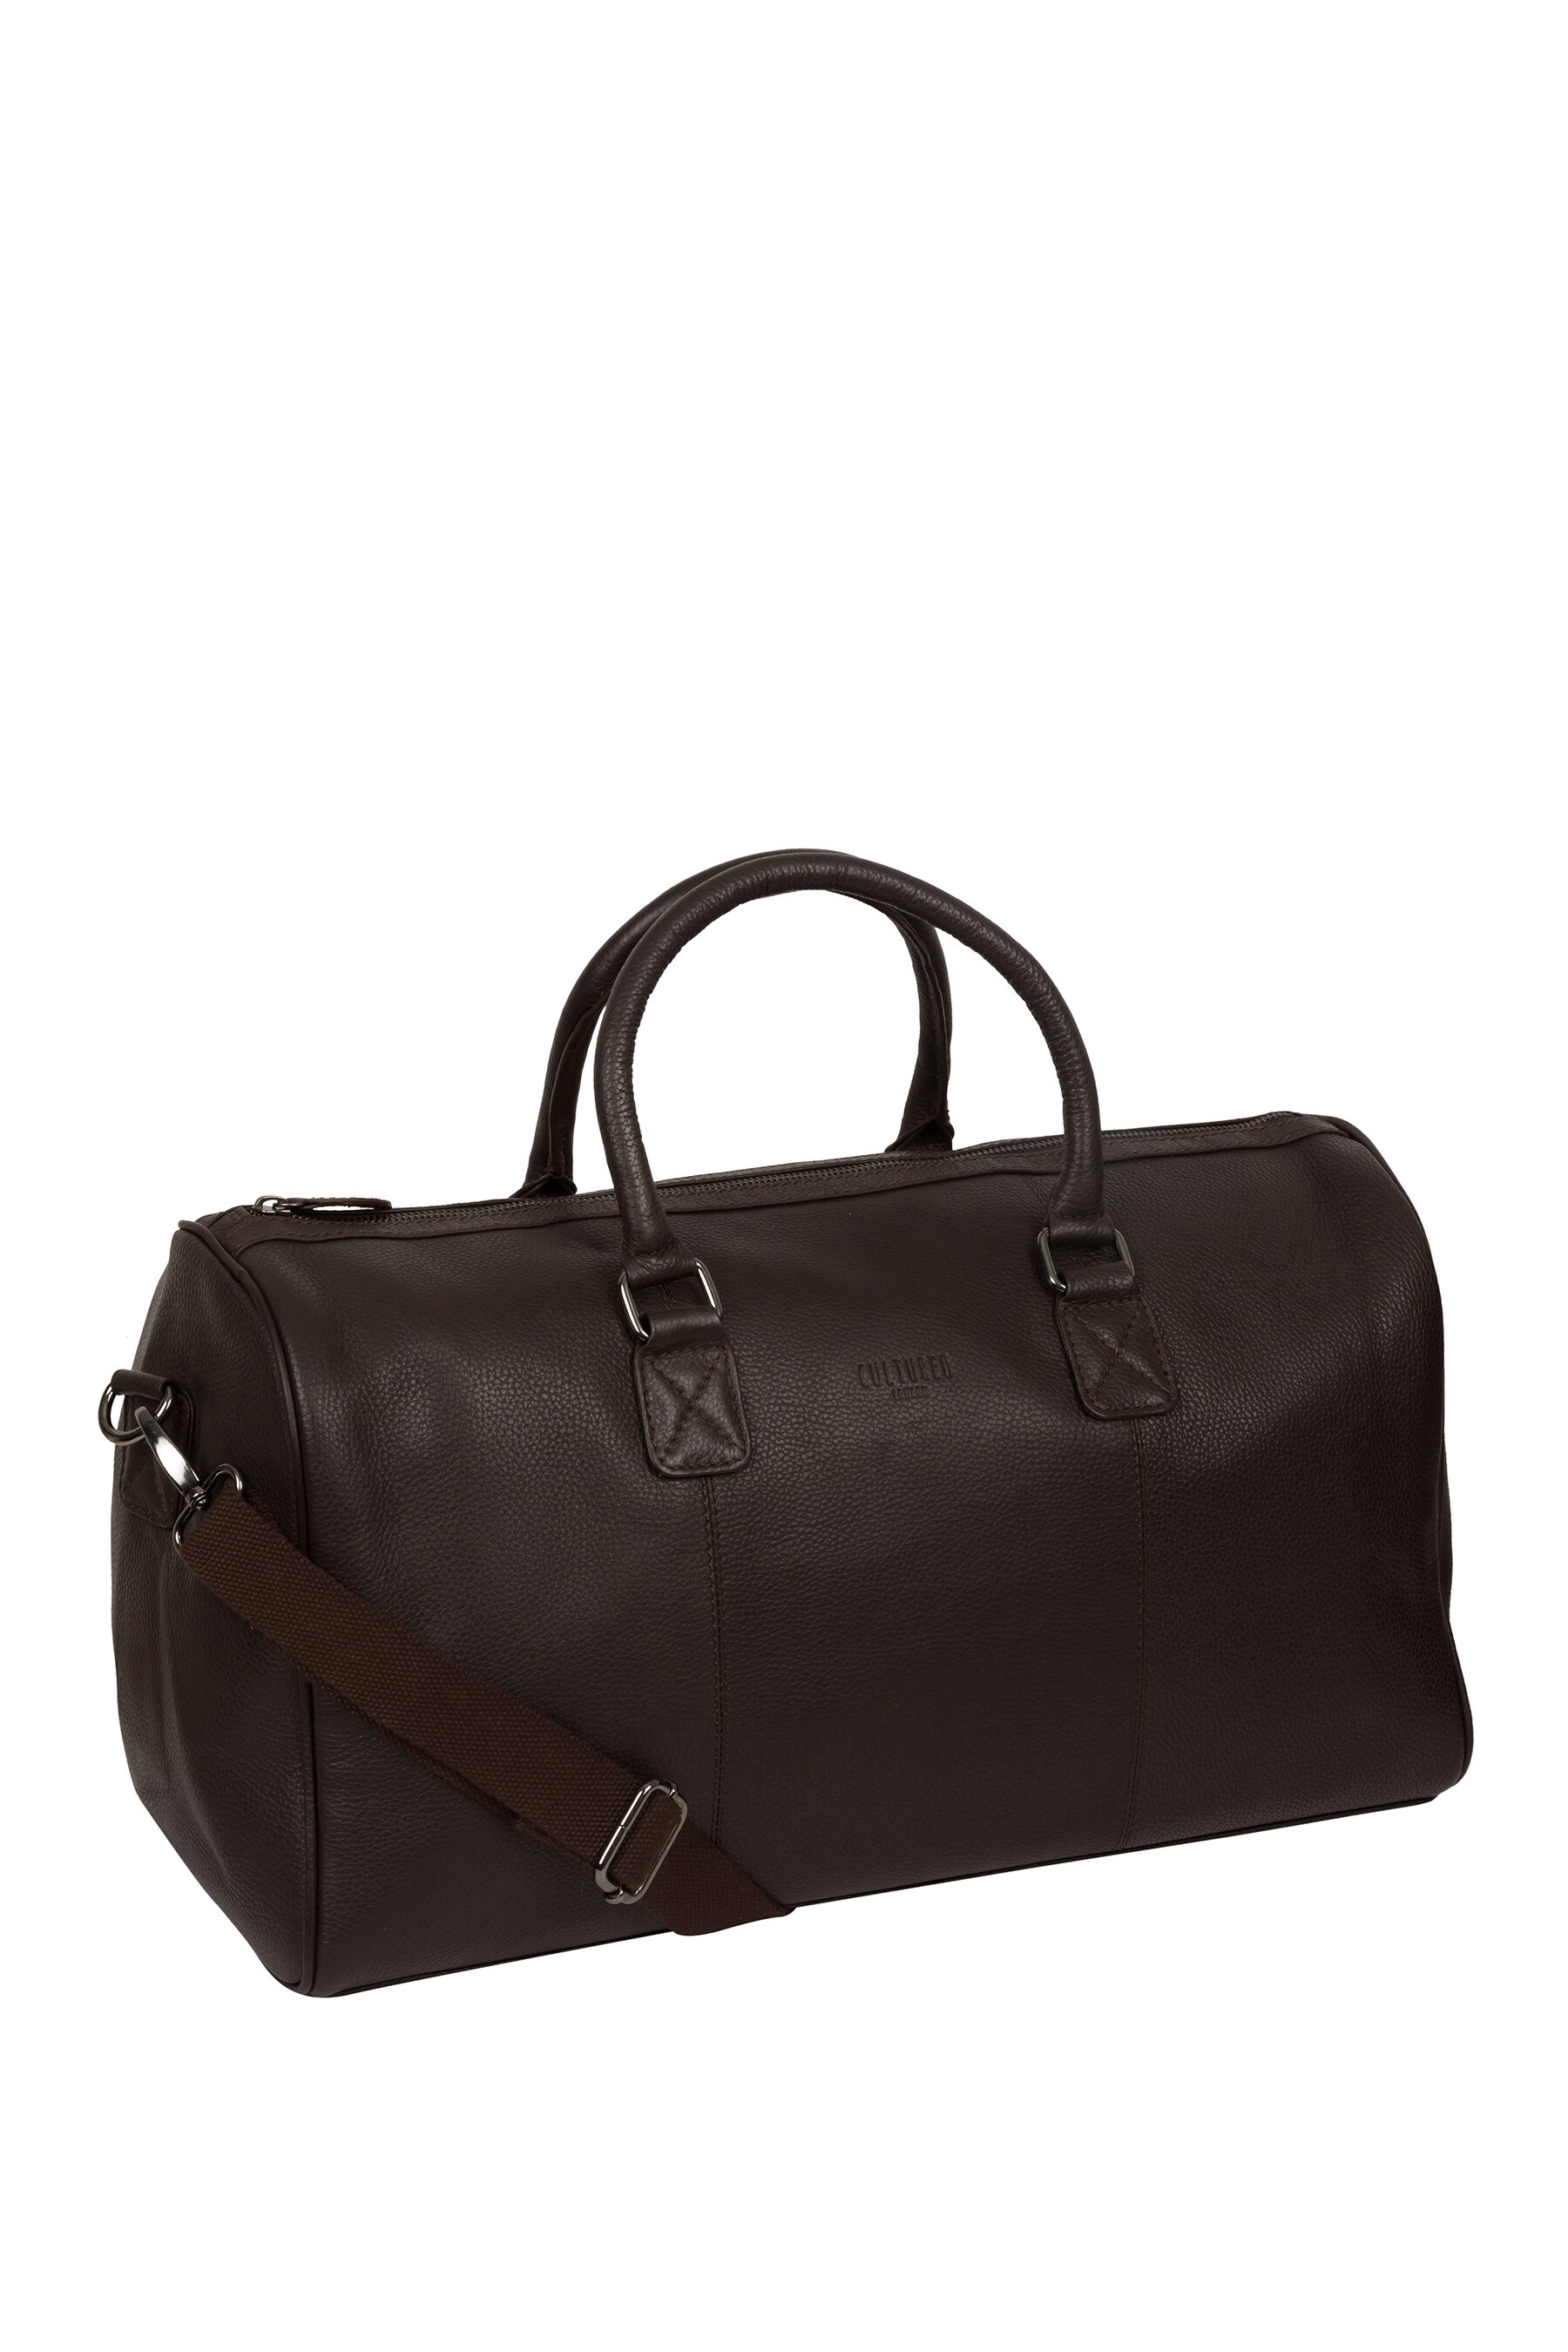 Buy Cultured London Brown Club Leather Holdall from the Next UK online shop